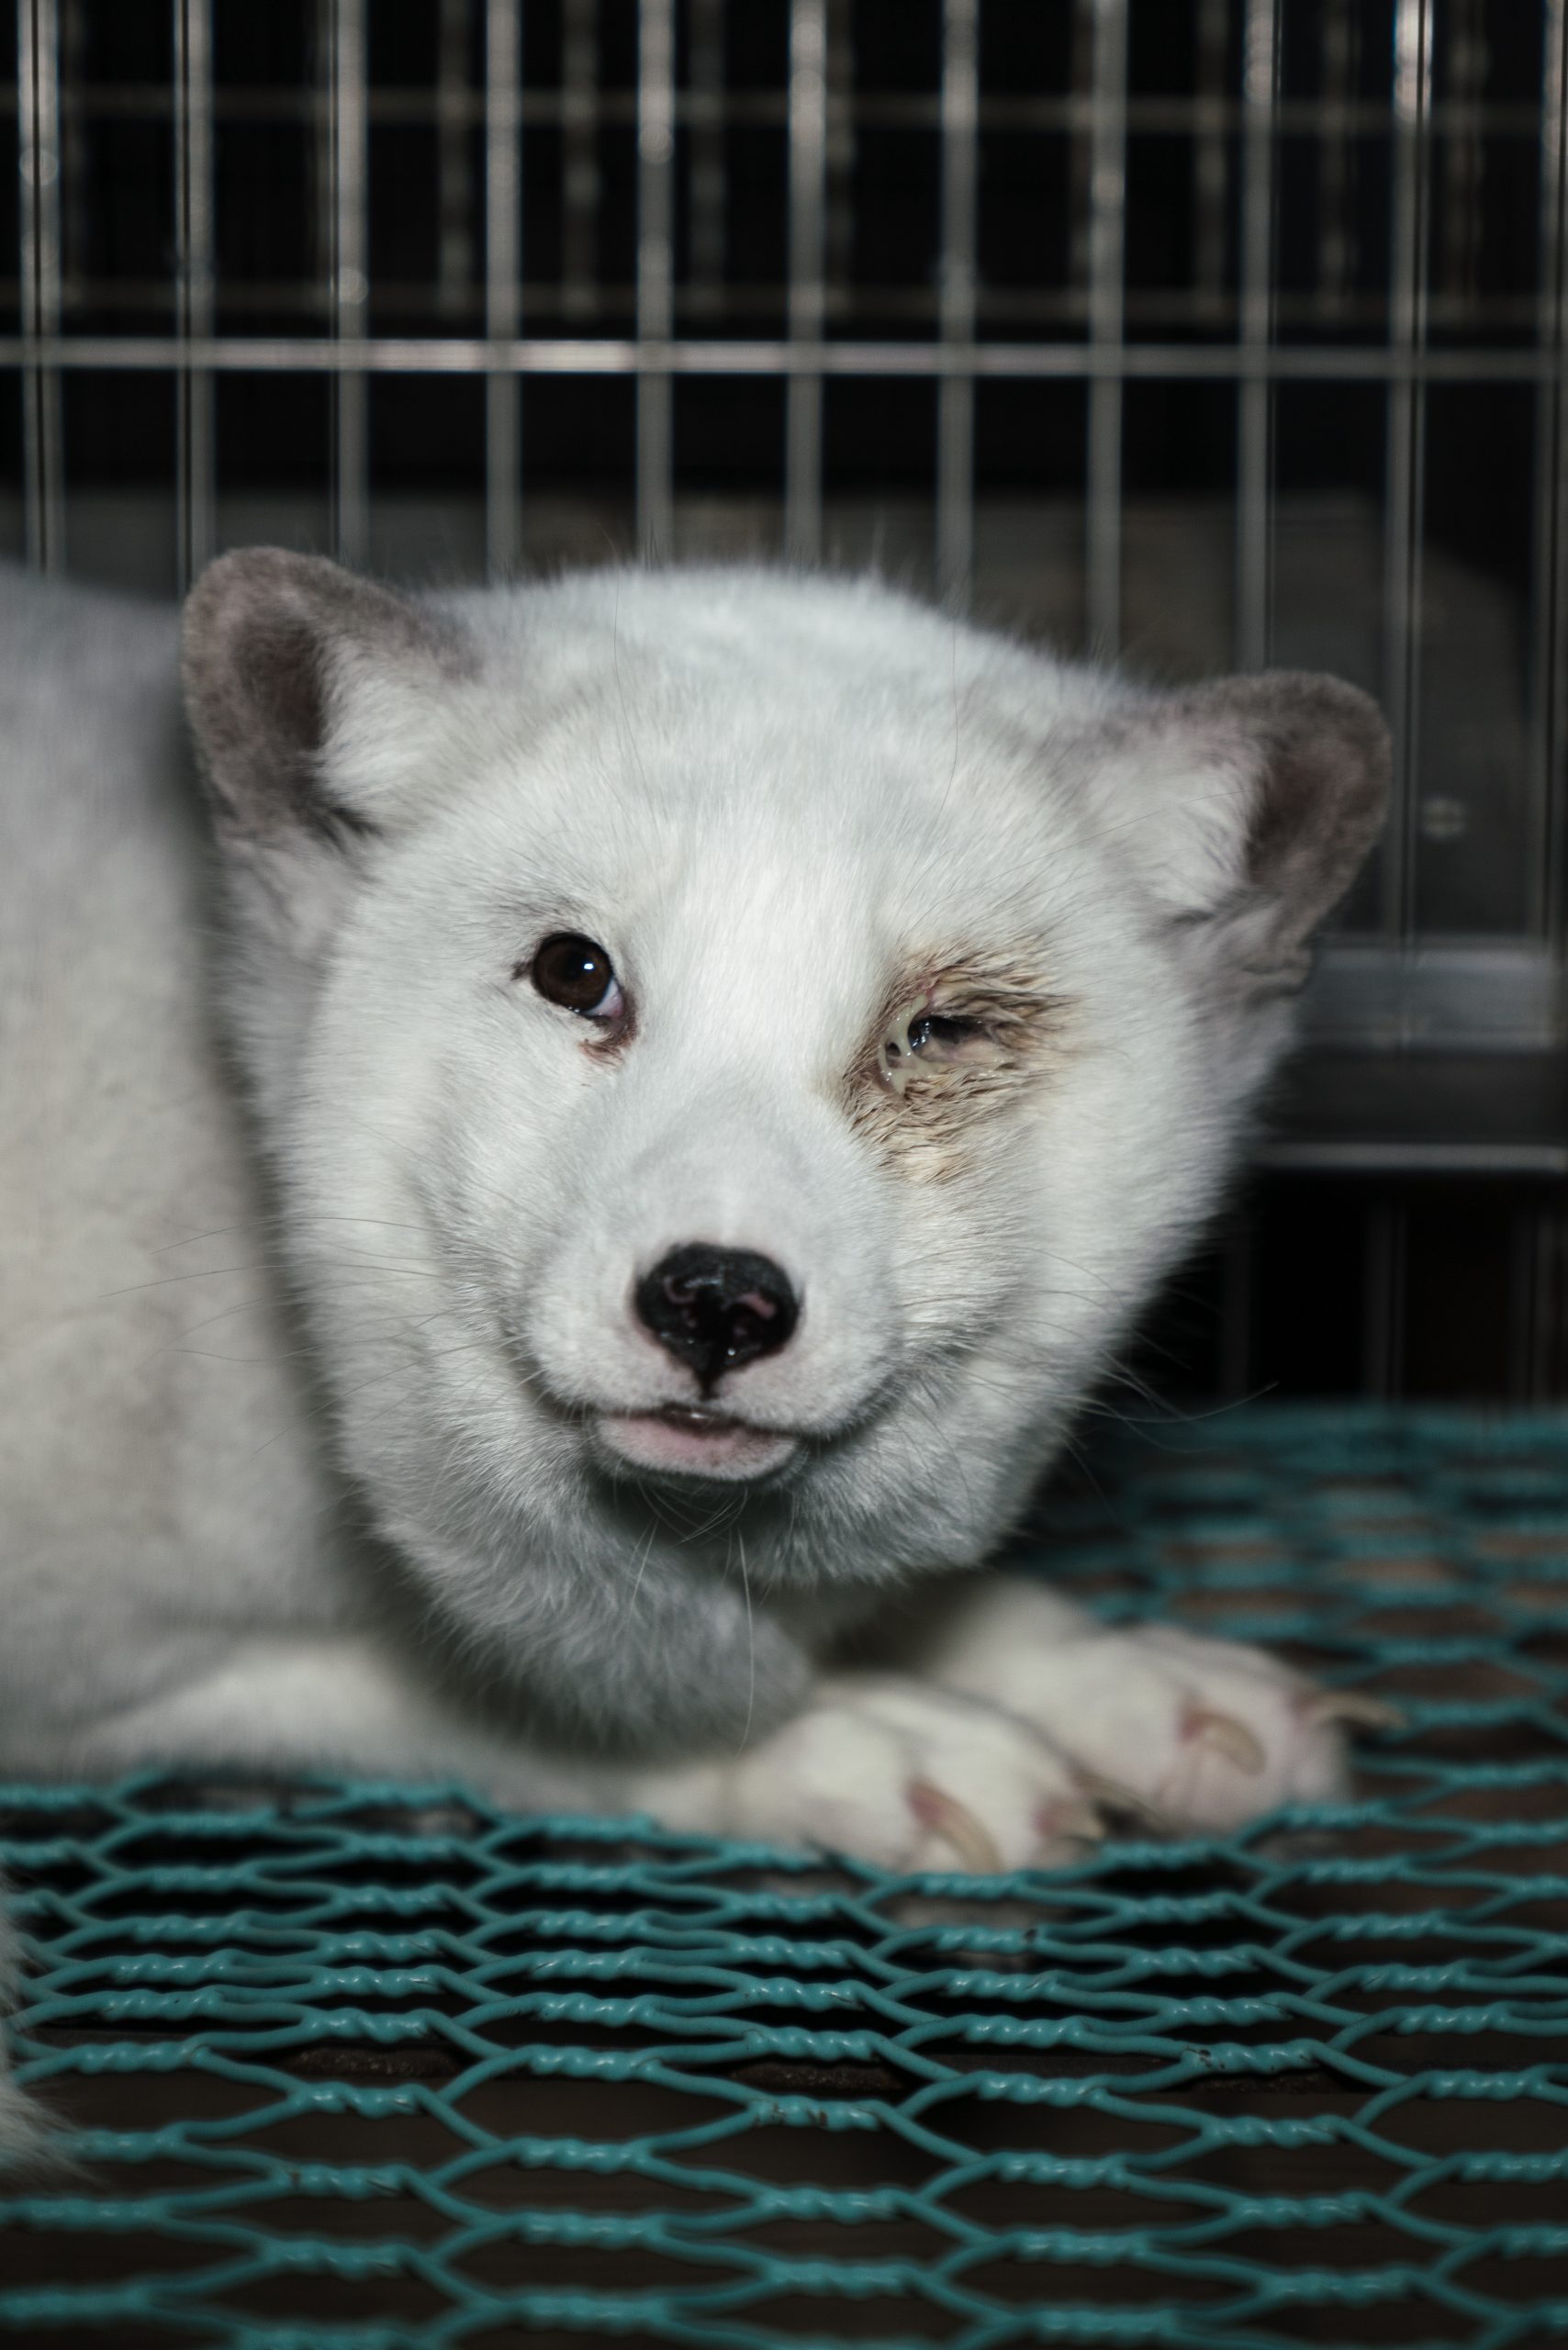 Arctic foxes on fur farms in Finland Oct 2021 show signs of deformed feet, overgrown claws, infected eyes, living in small, barren, wire cages.